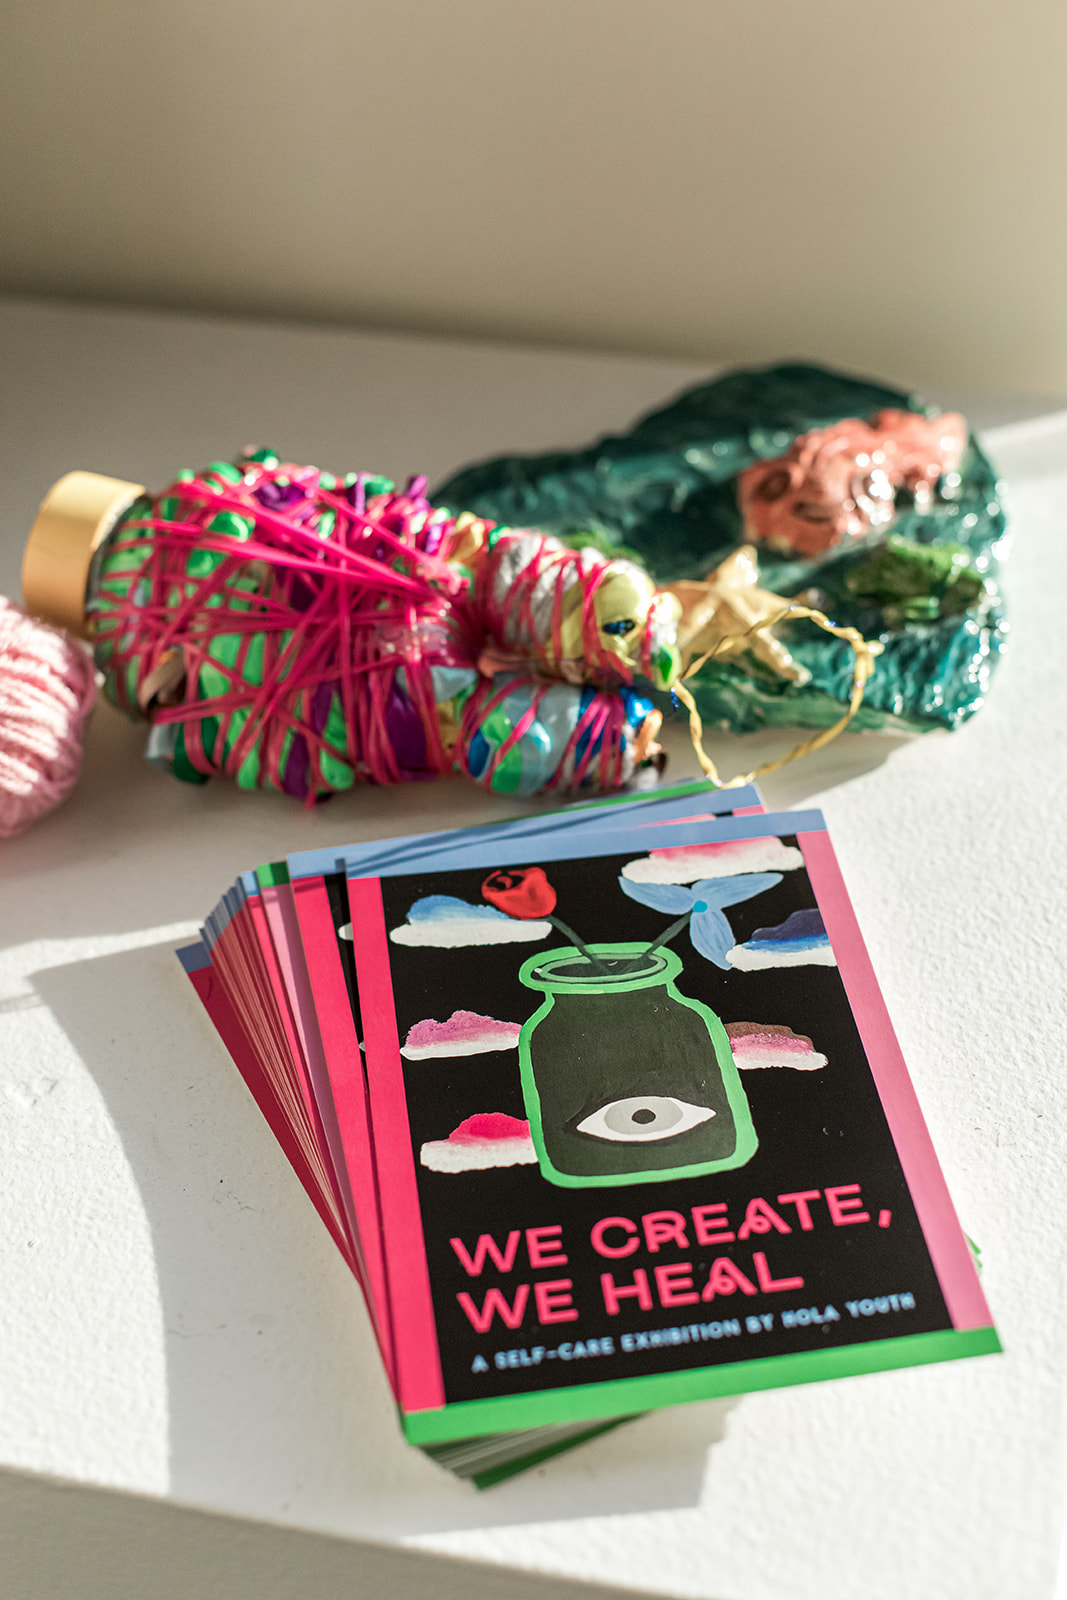 We Create, We Heal, a self-care group exhibition